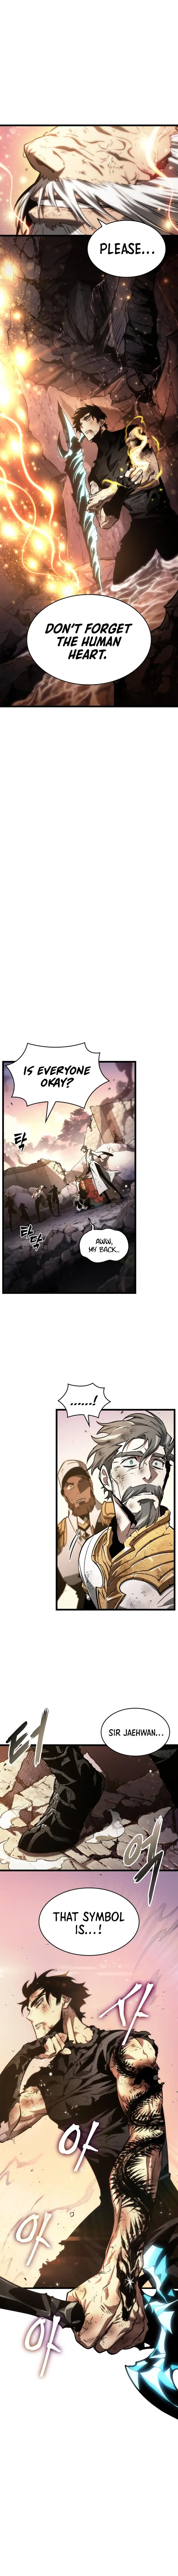 the-world-after-the-end-chap-32-5